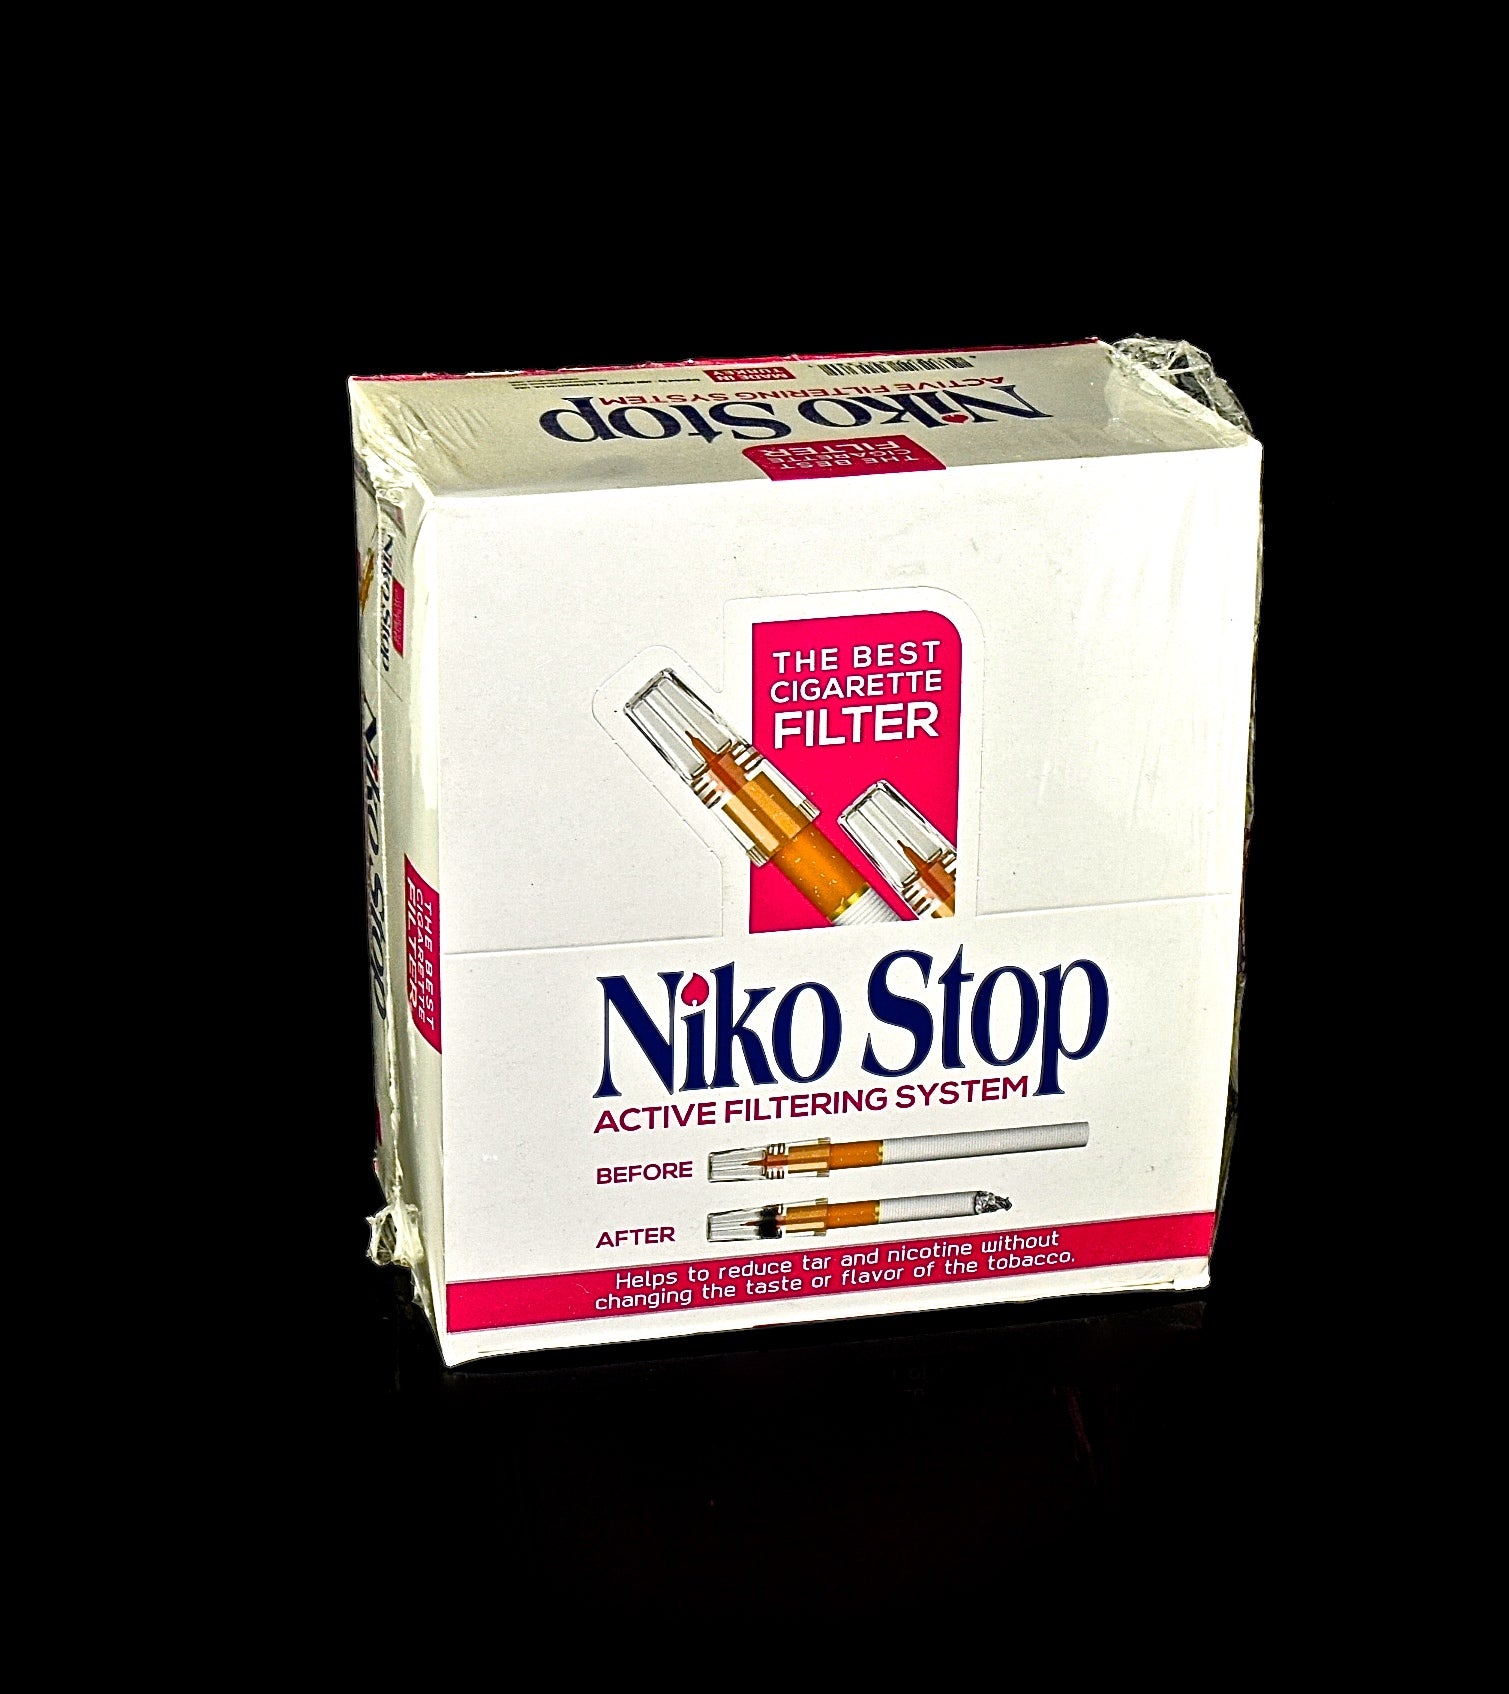 Niko Stop Active Filtering System The Cigarette Filter-1117